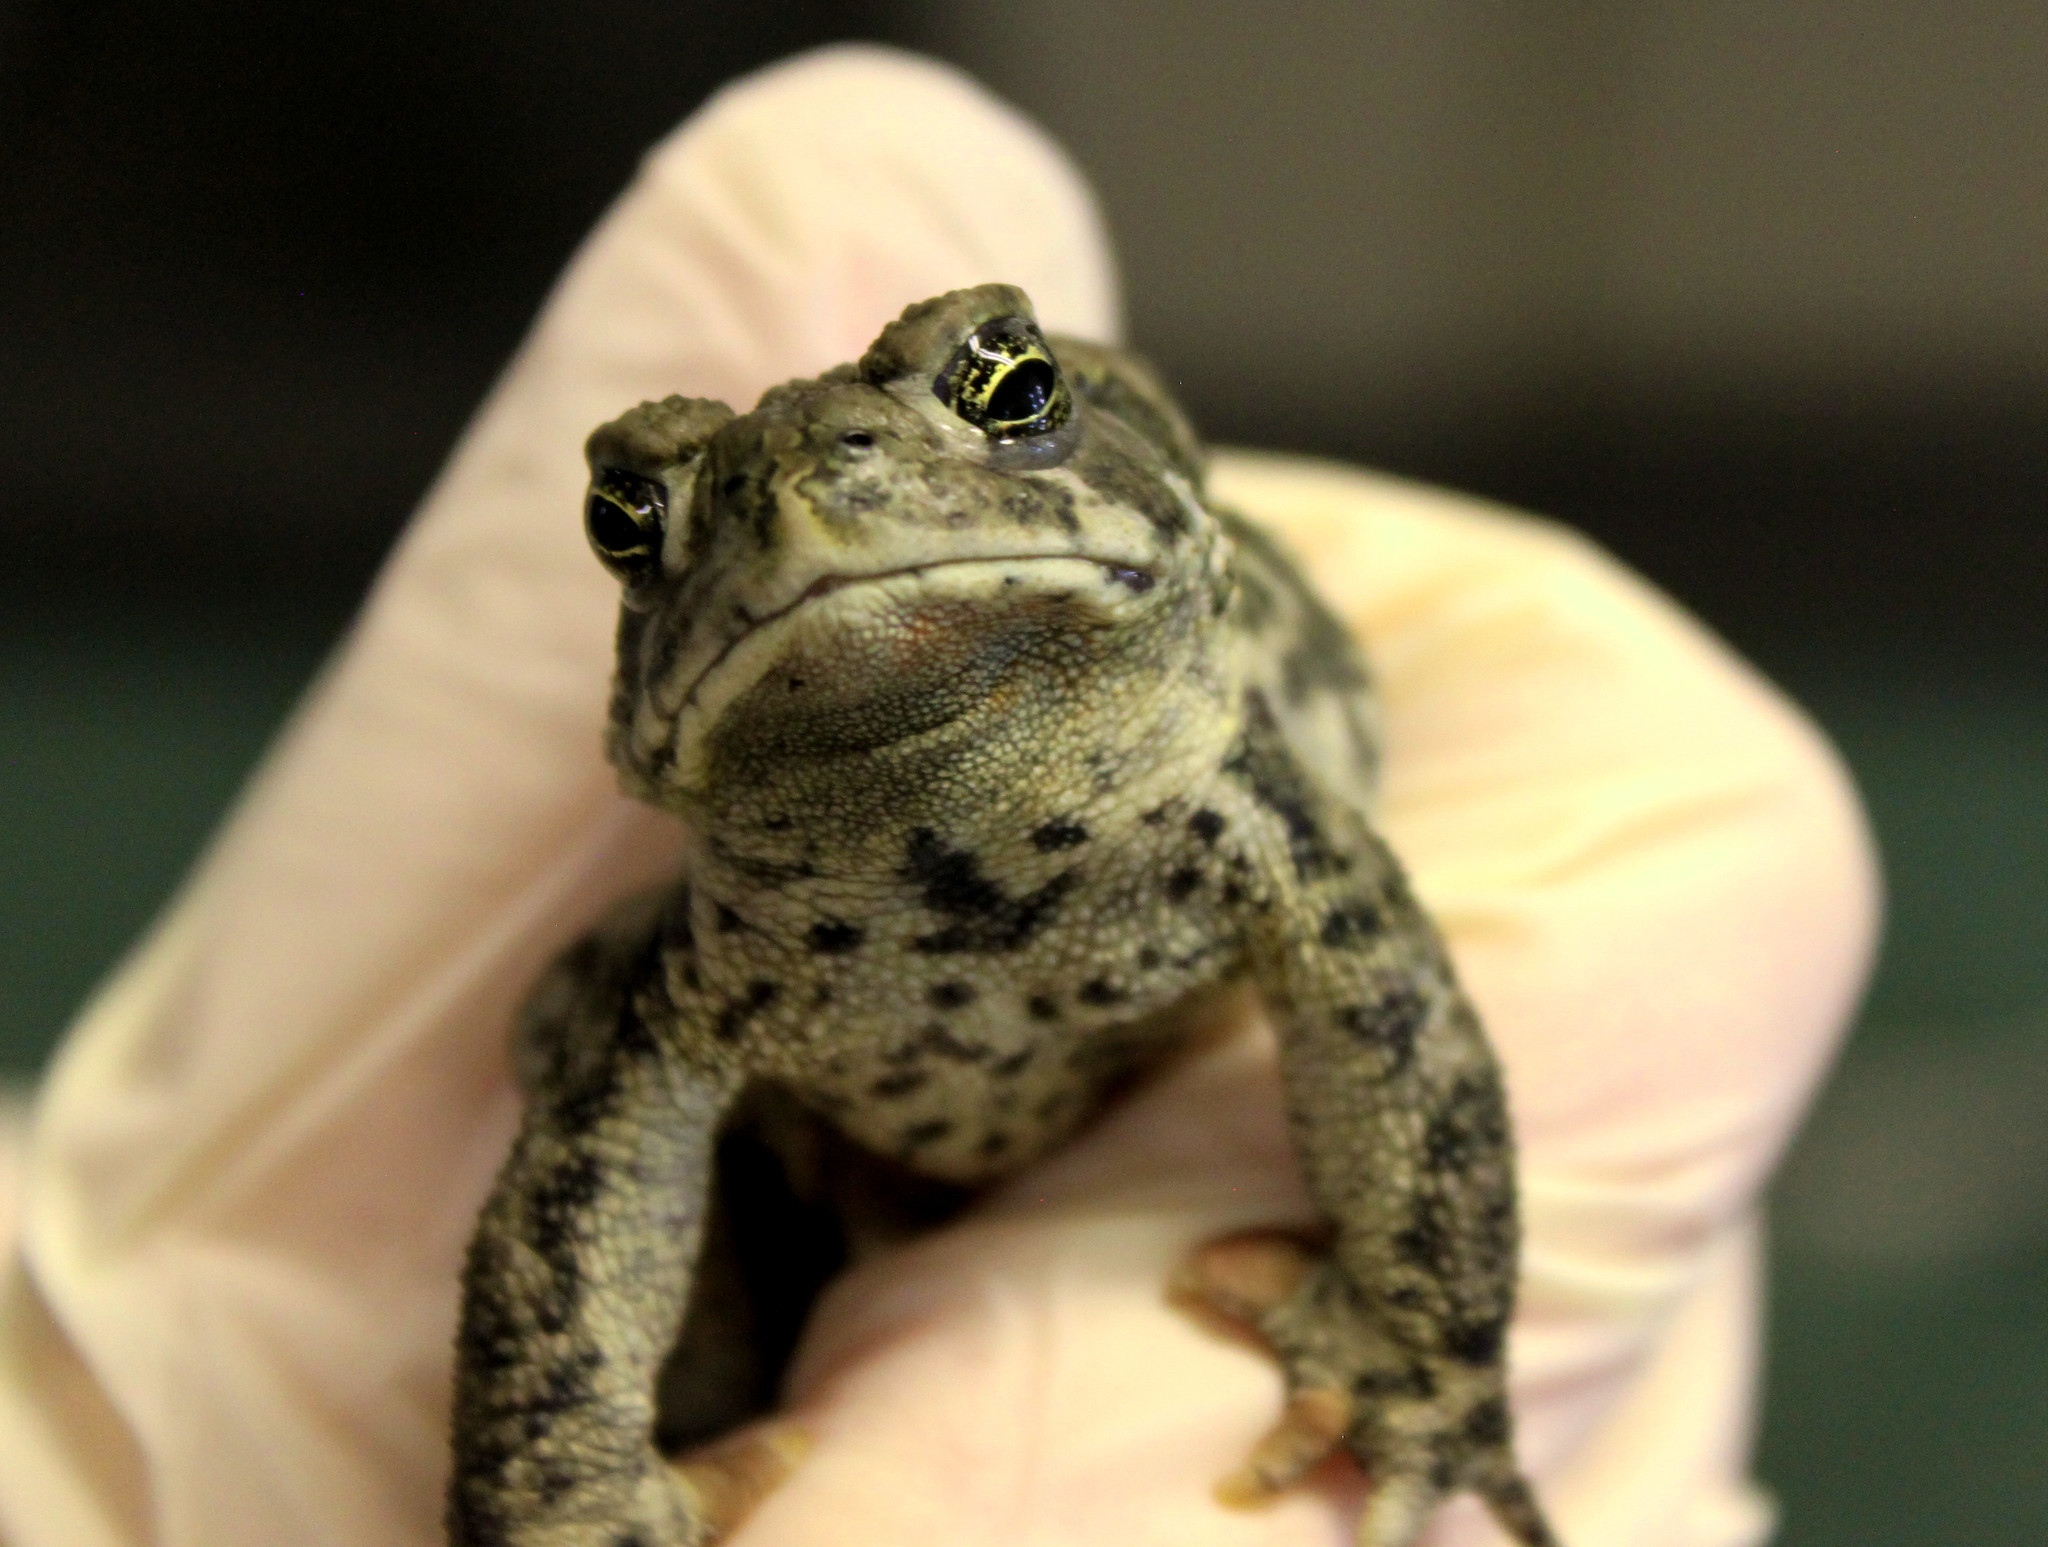 Close-up of a spotted toad in a gloved hand.